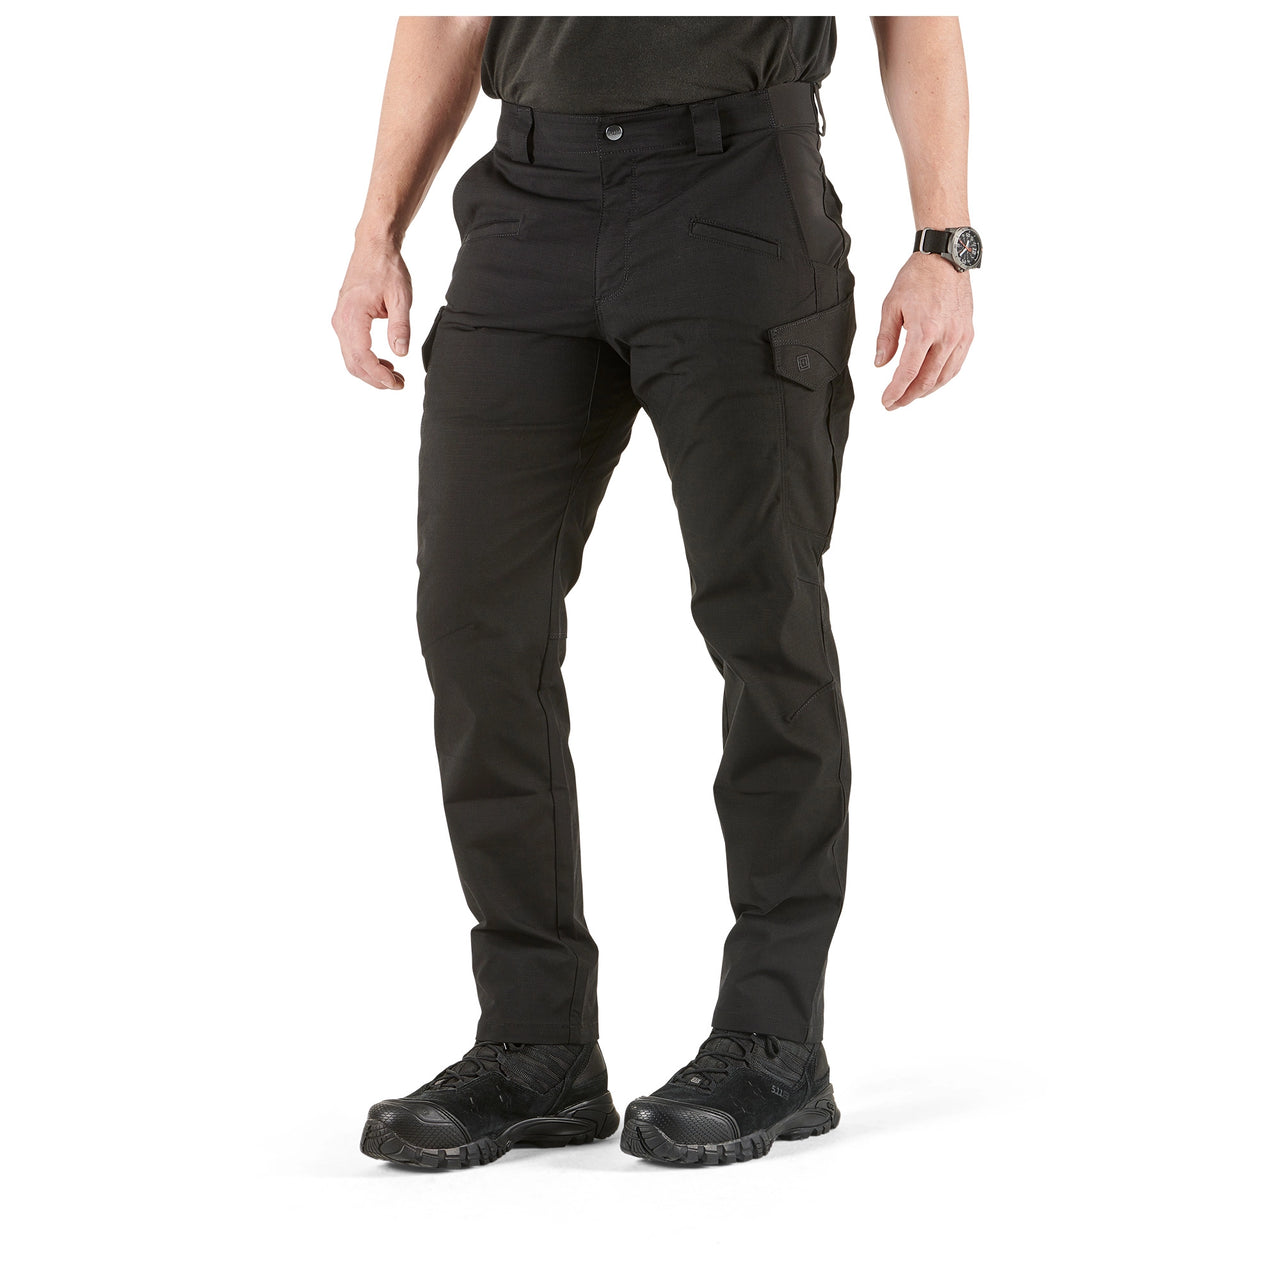 5.11 Tactical Pants, Pants, Clothing & Accessories